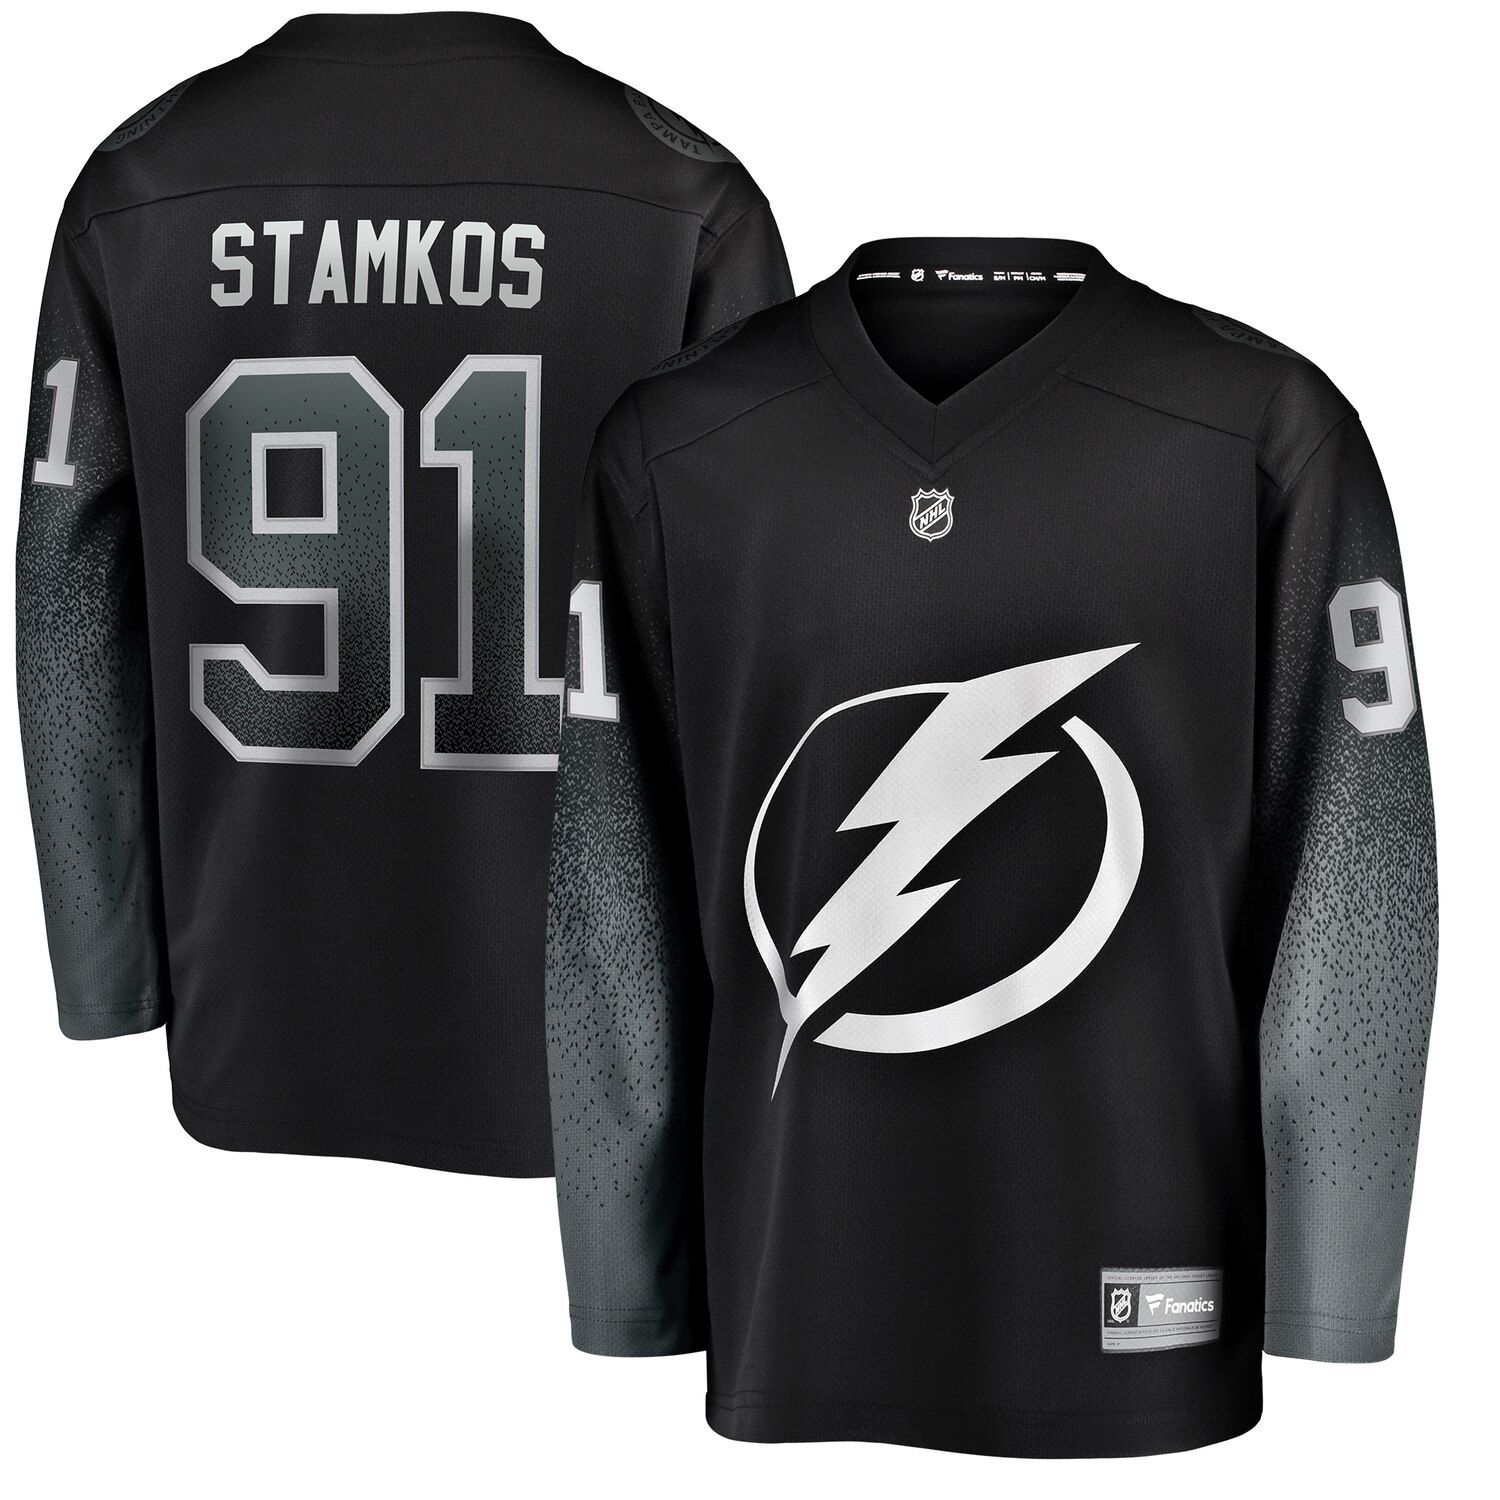 official tampa bay lightning jersey